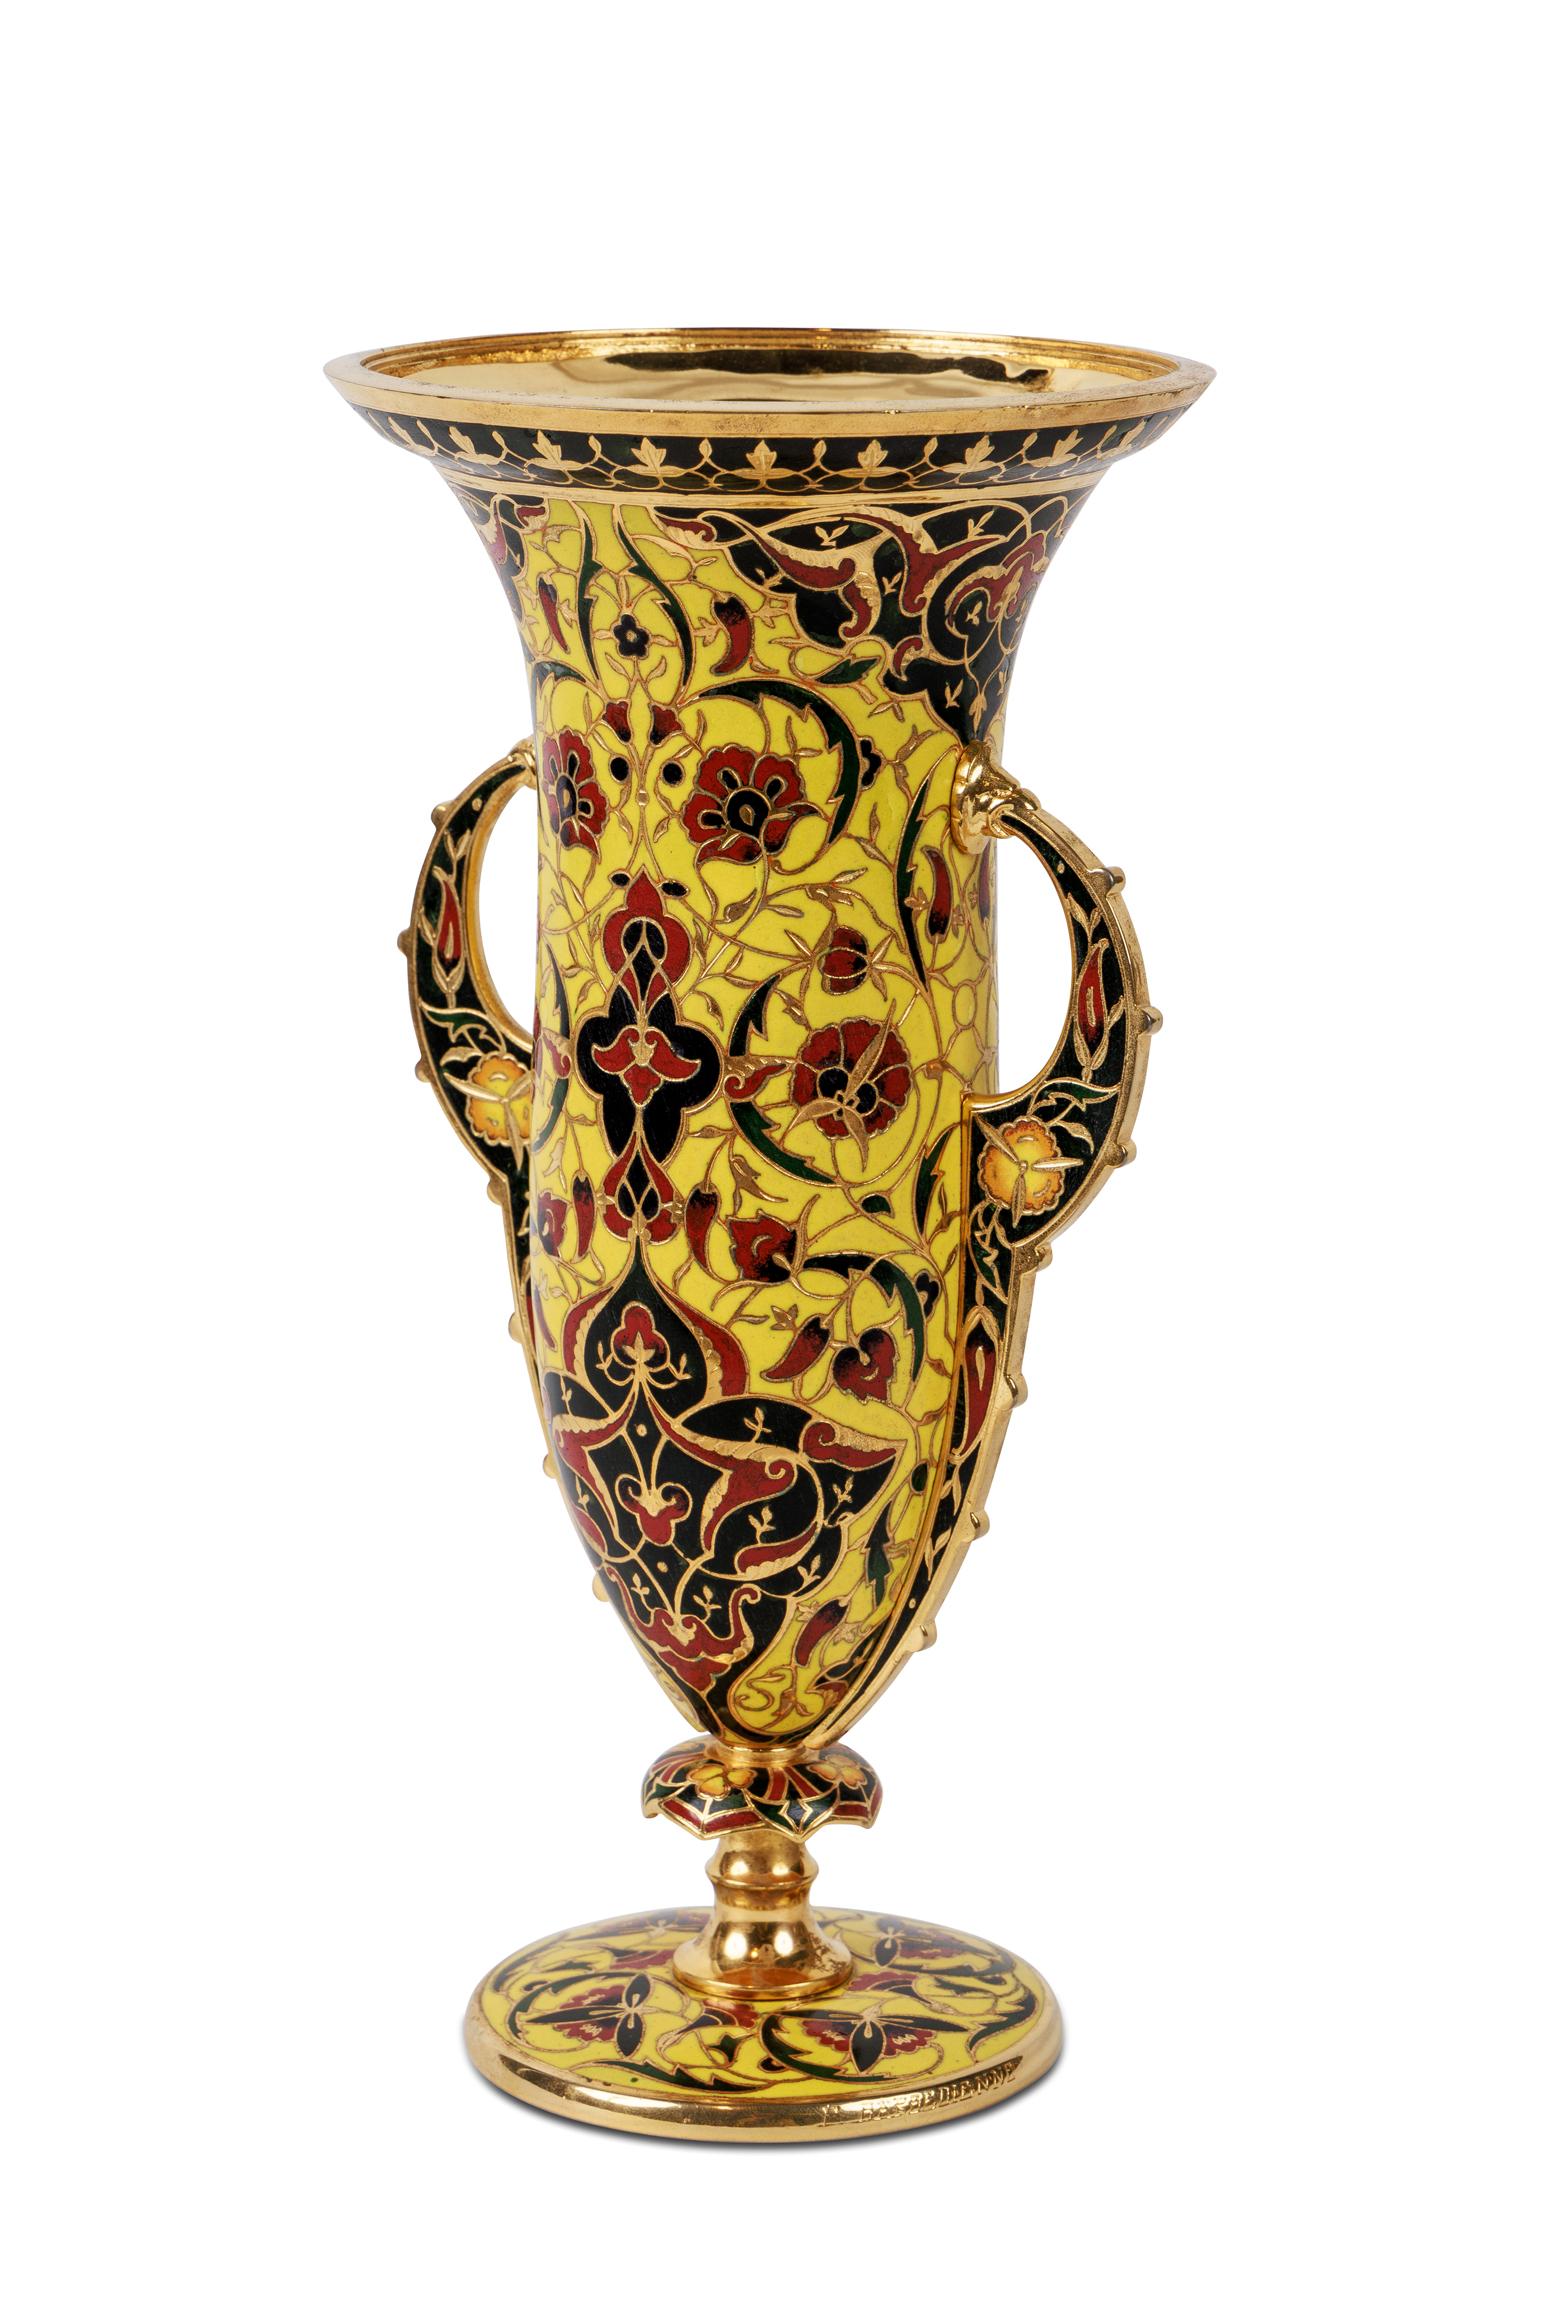 Ferdinand Barbedienne, A French Ormolu and Champleve Enamel Vase, C. 1870 1